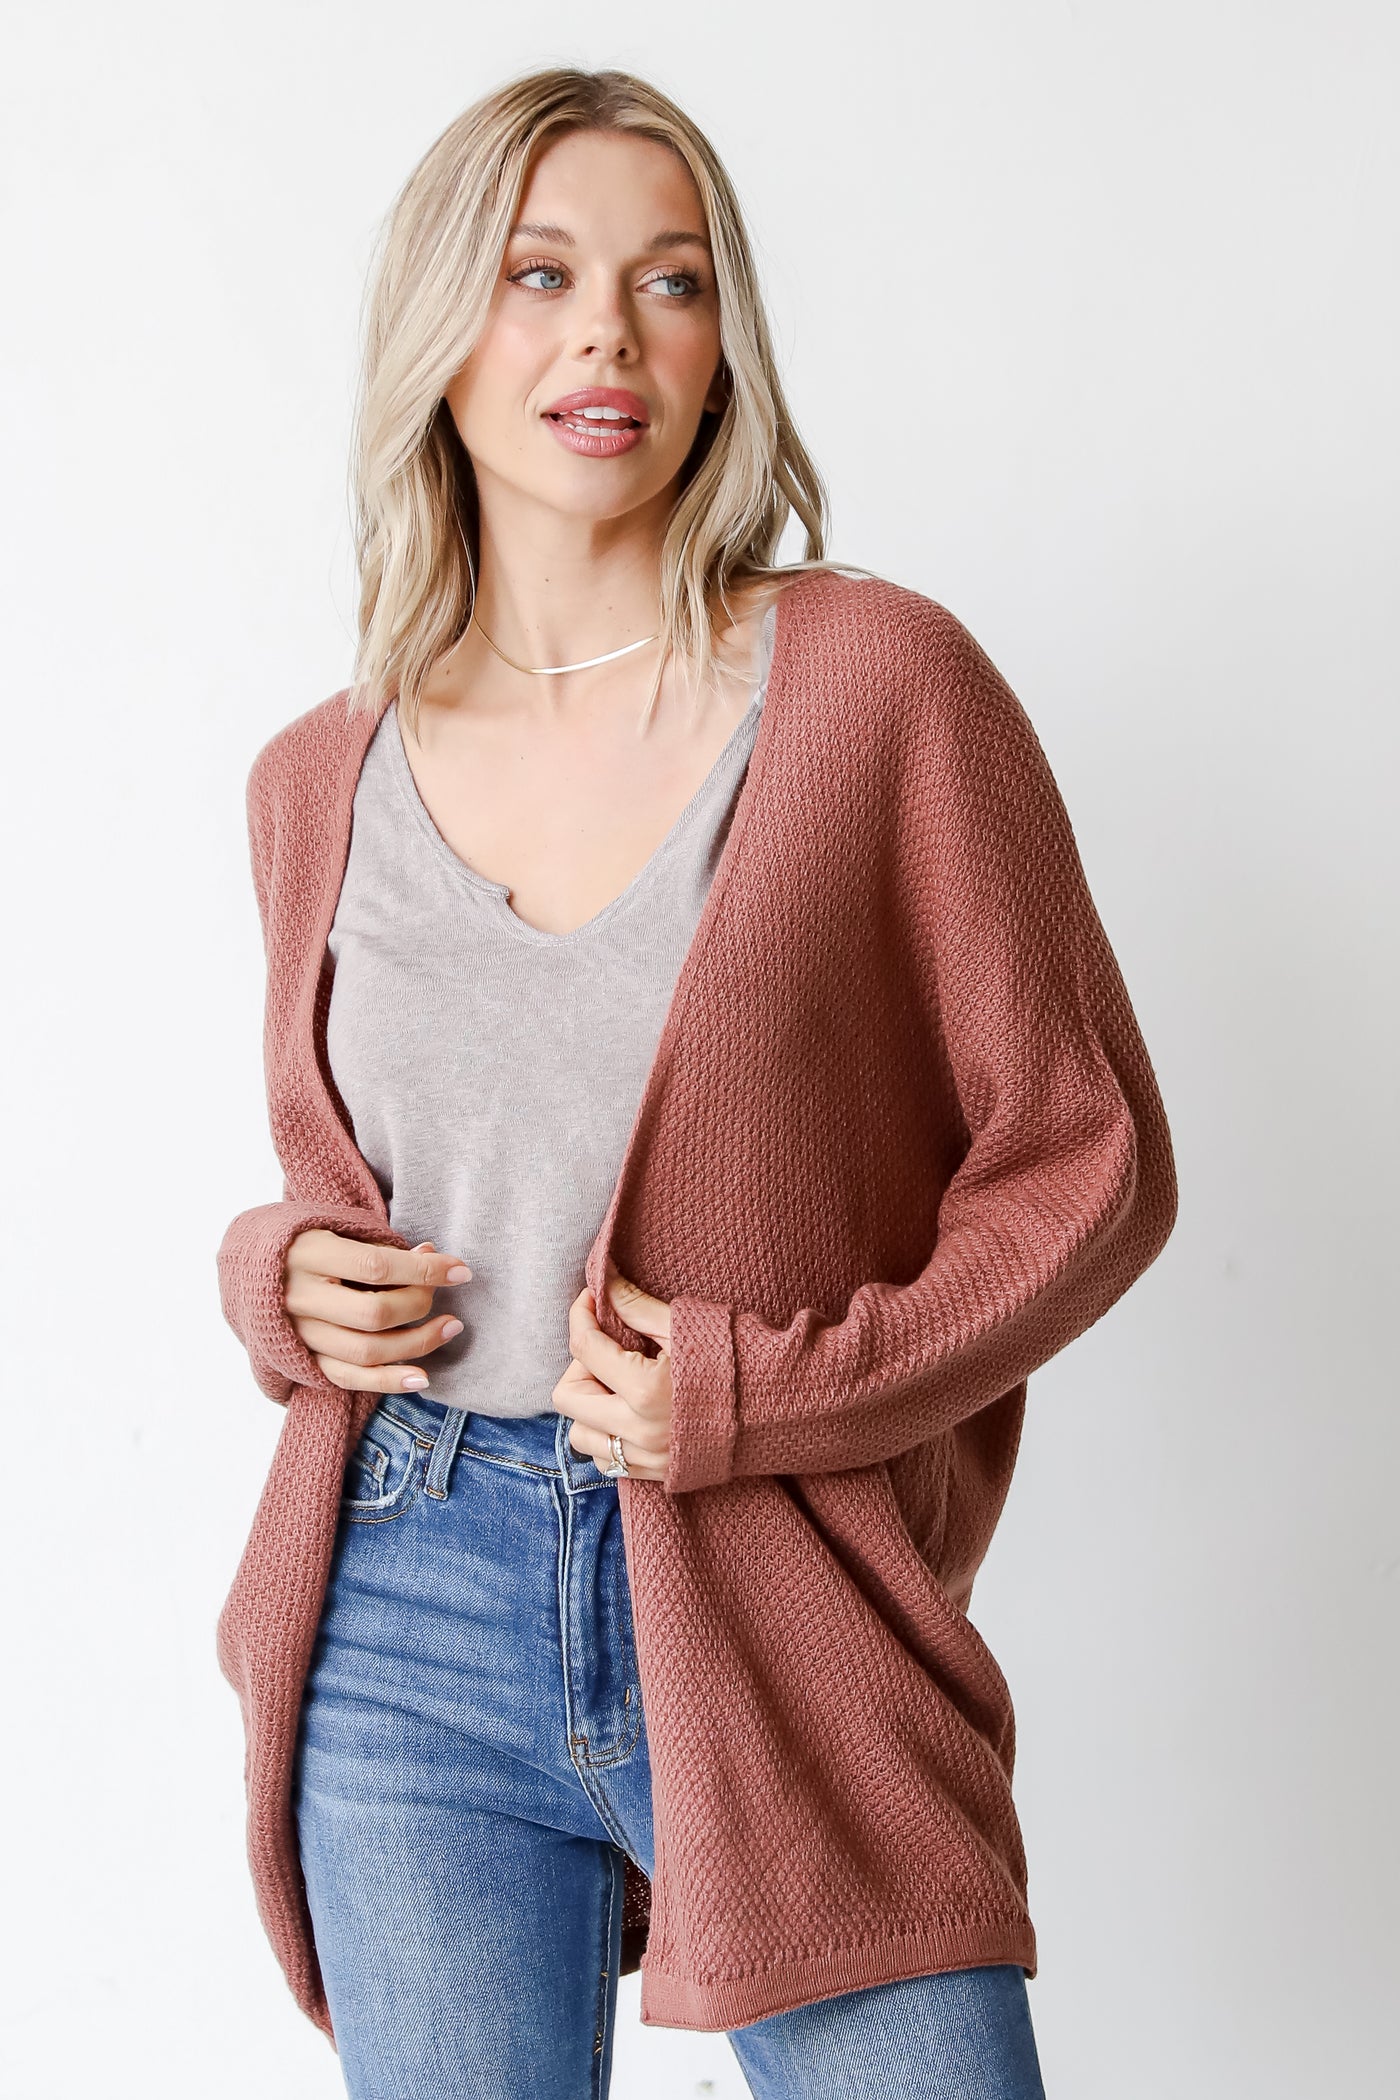 red Knit Cardigan